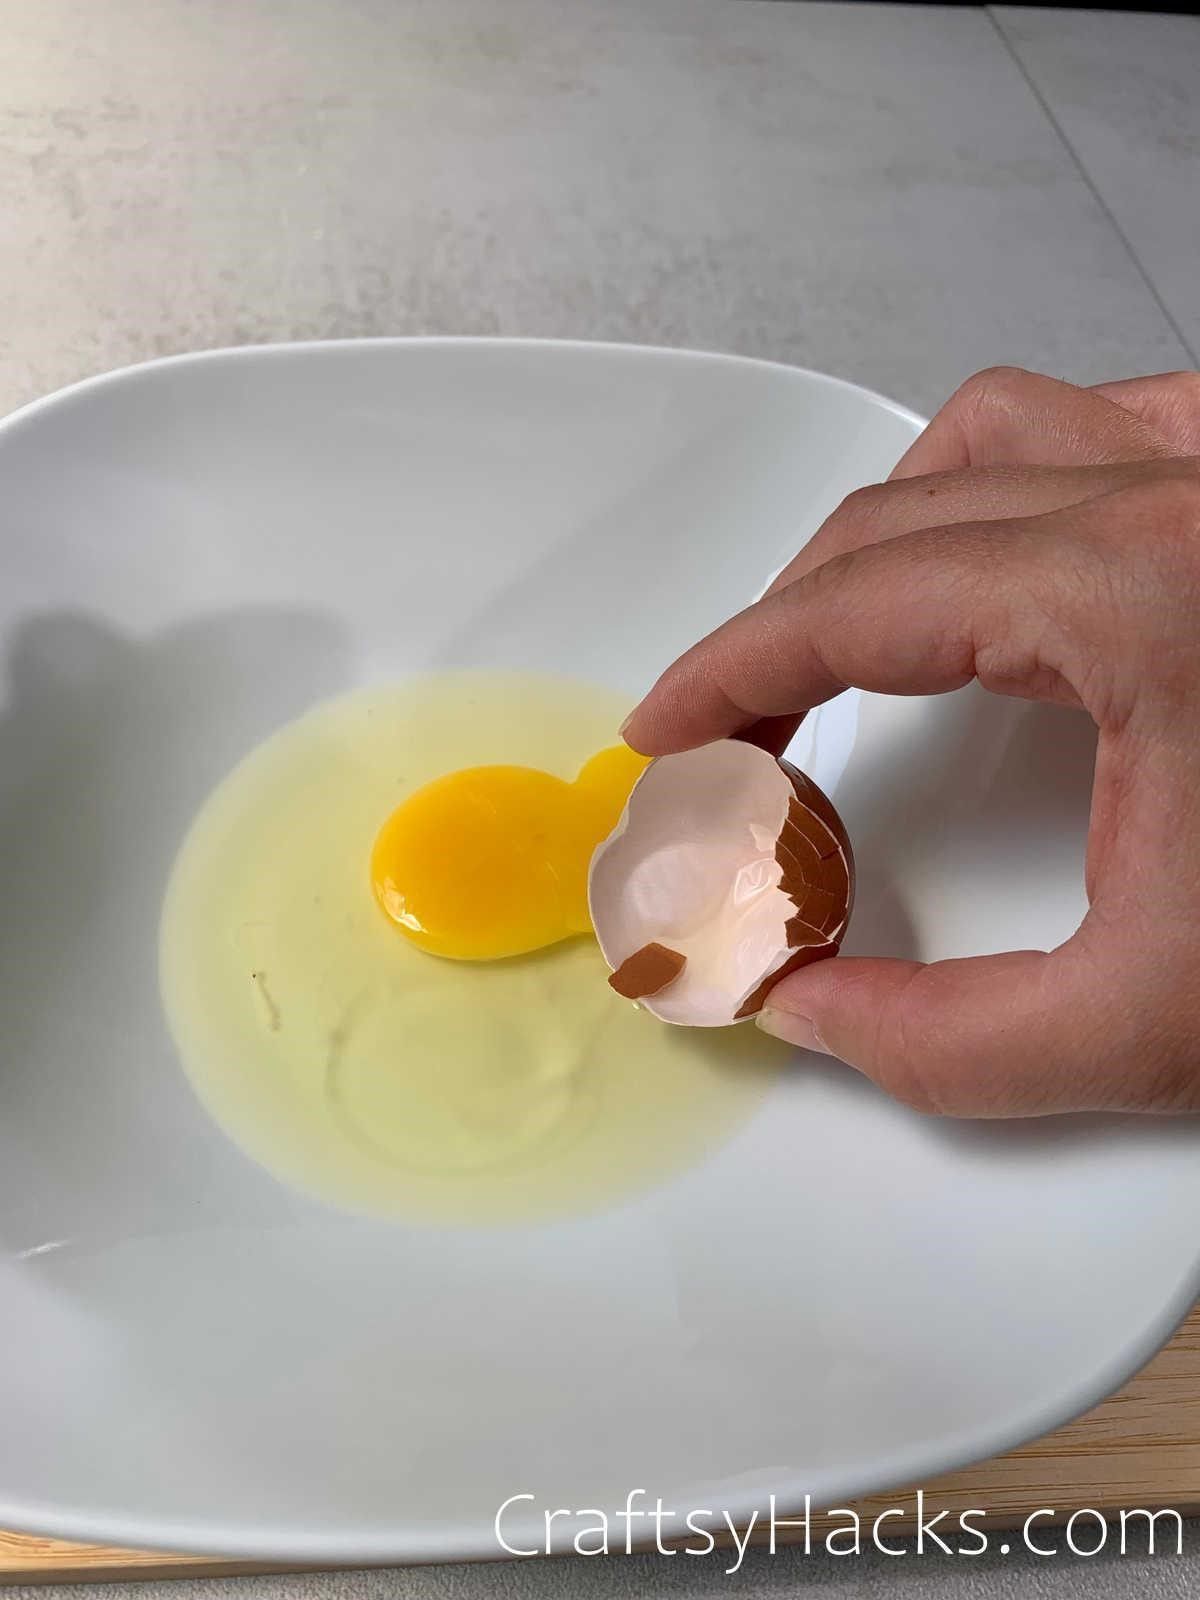 remove egg shell pieces